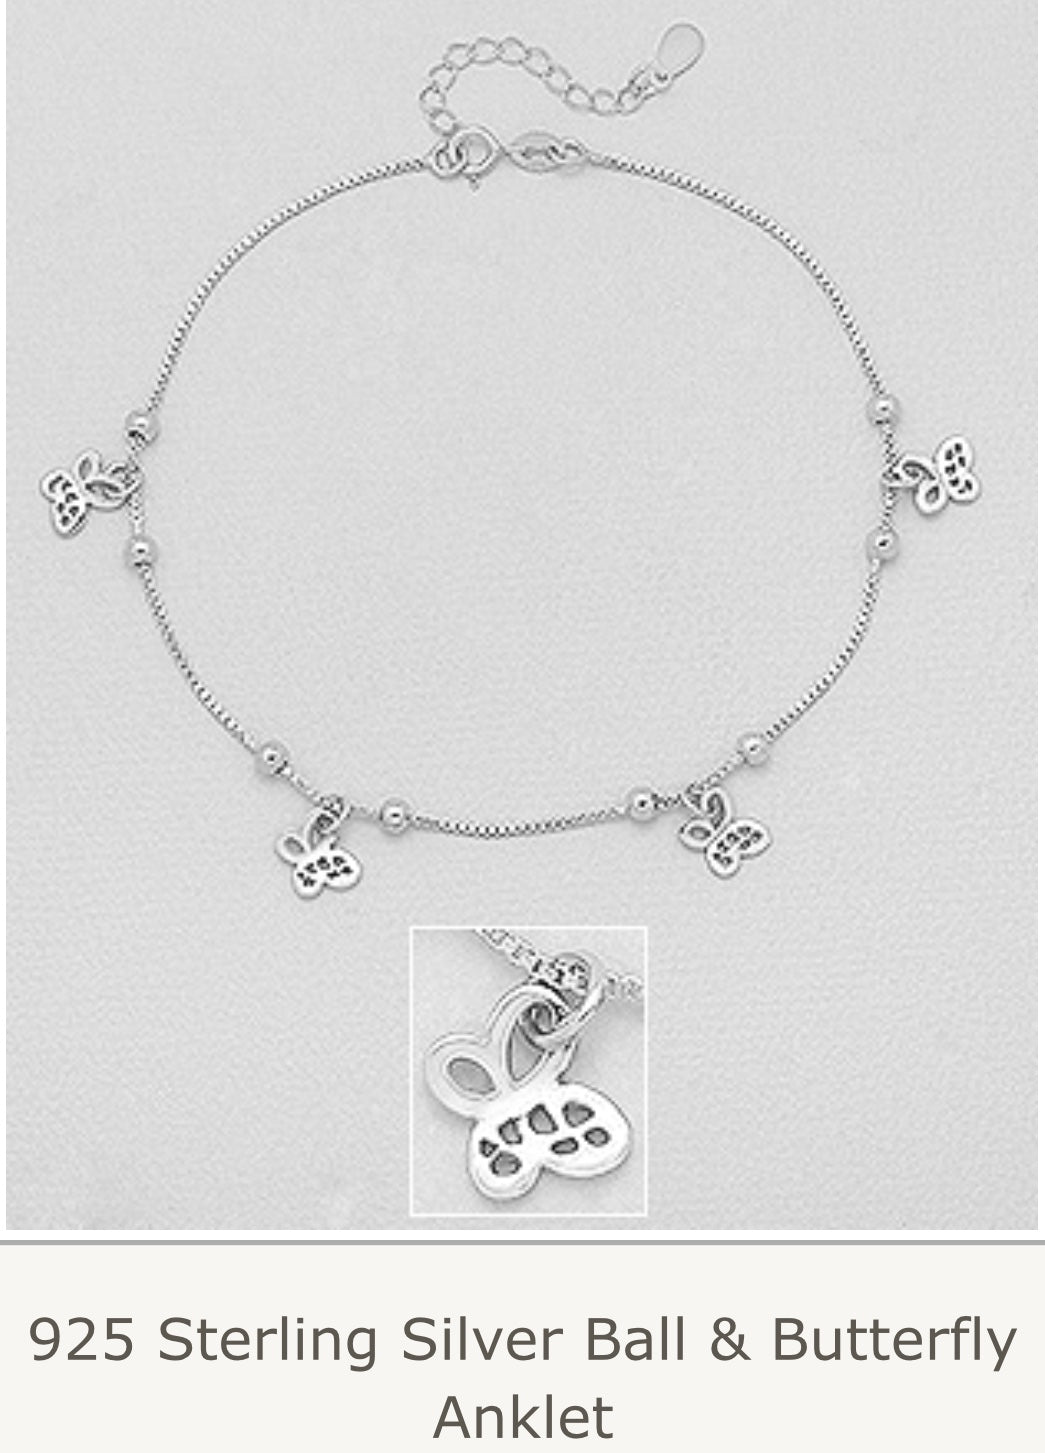 Butterfly cutout Anklet